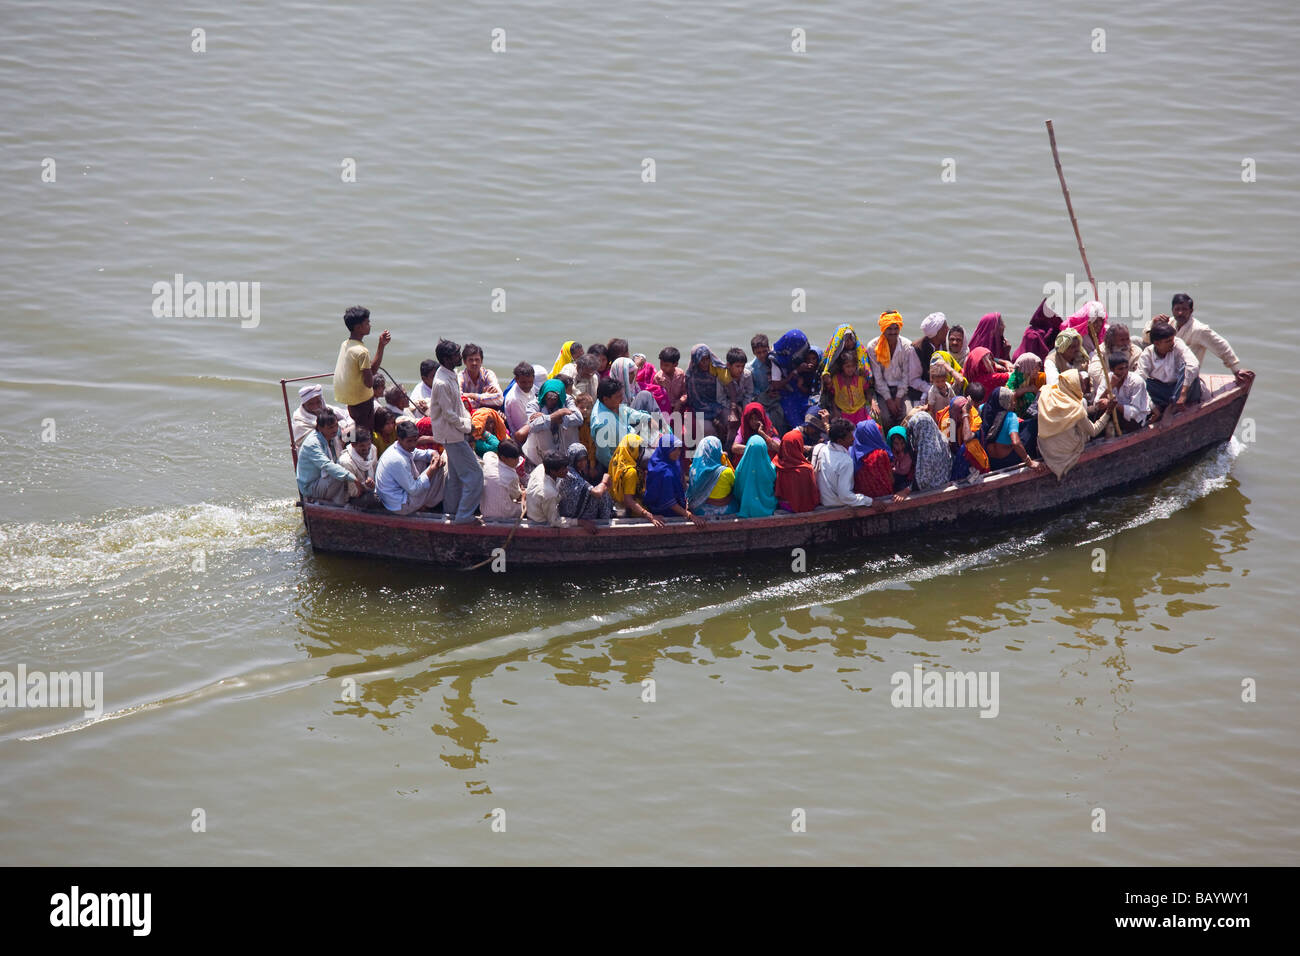 Indian People in a Boat on the Ganga River in Varanasi India Stock Photo